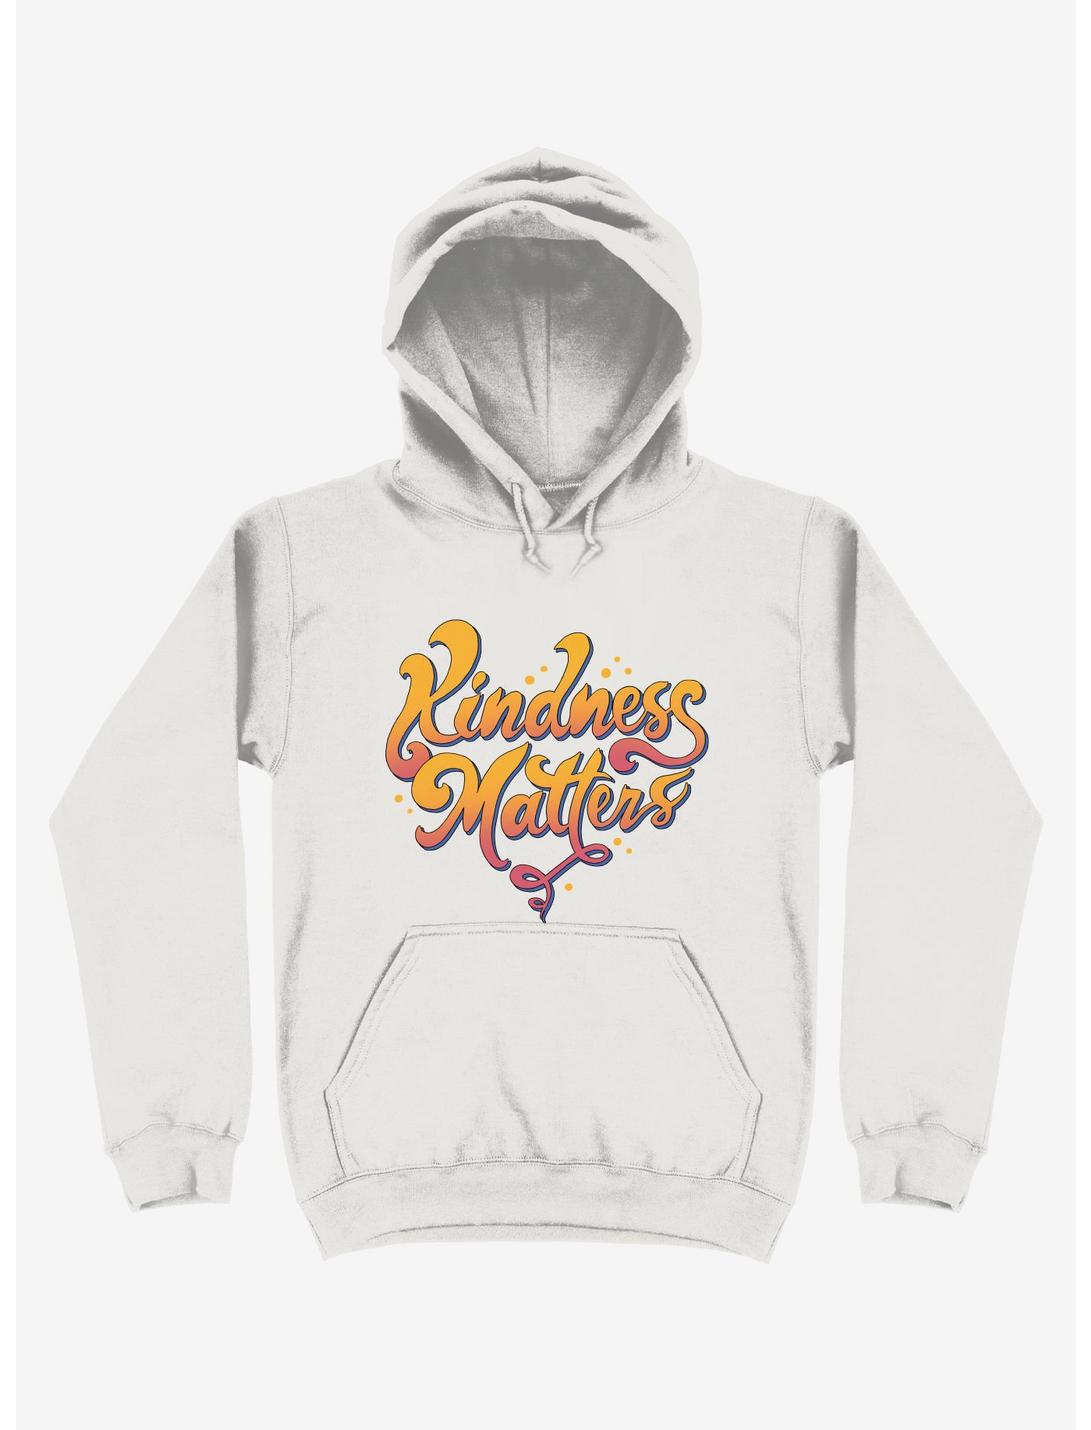 Kindness Matters White Hoodie, WHITE, hi-res